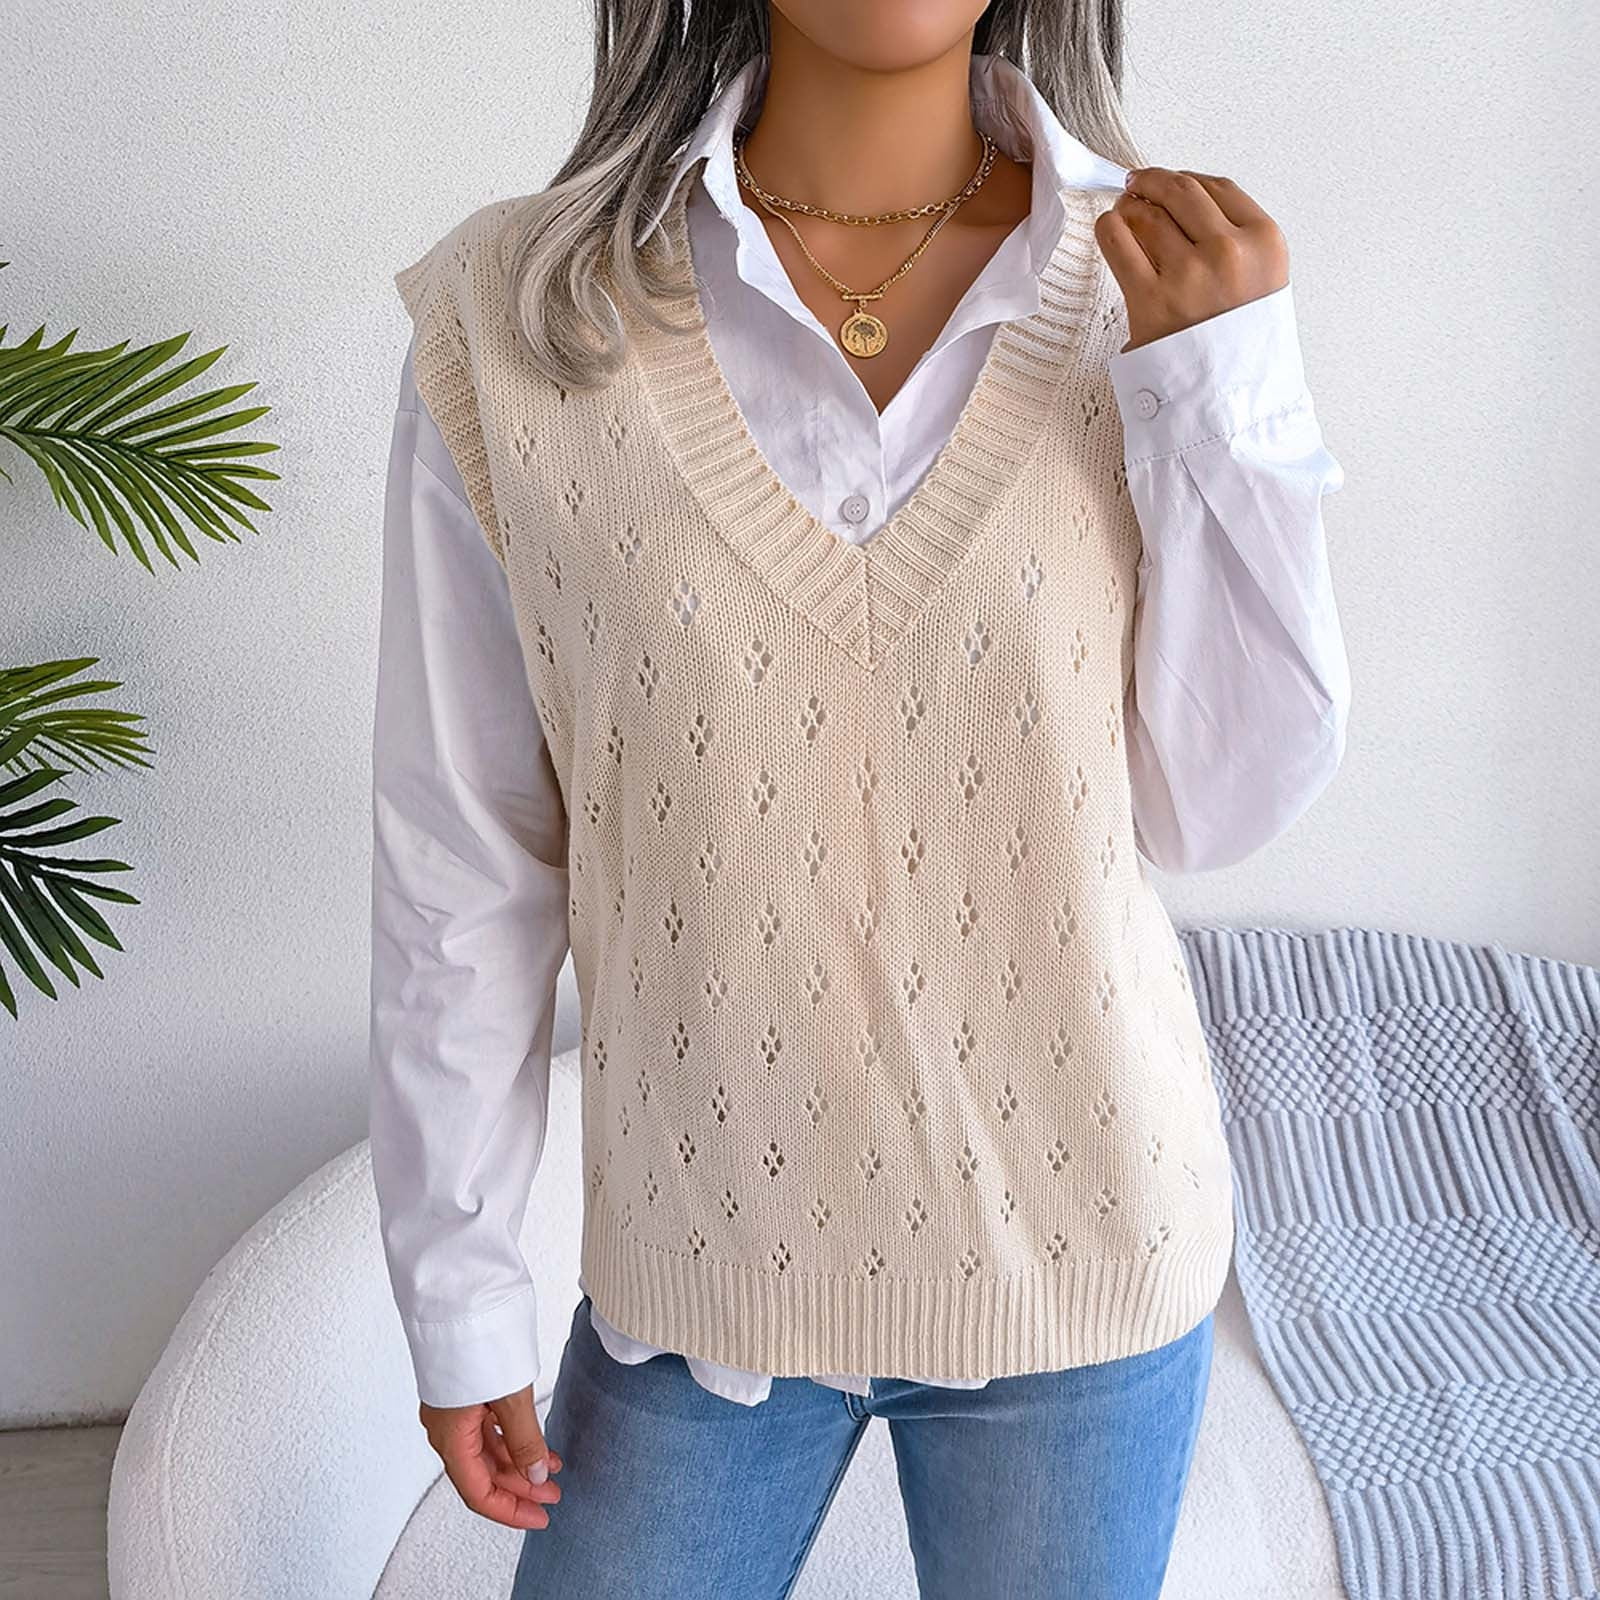 Taqqpue Womens V-Neck Cable Knit Sweater Vest Plus Size, 47% OFF